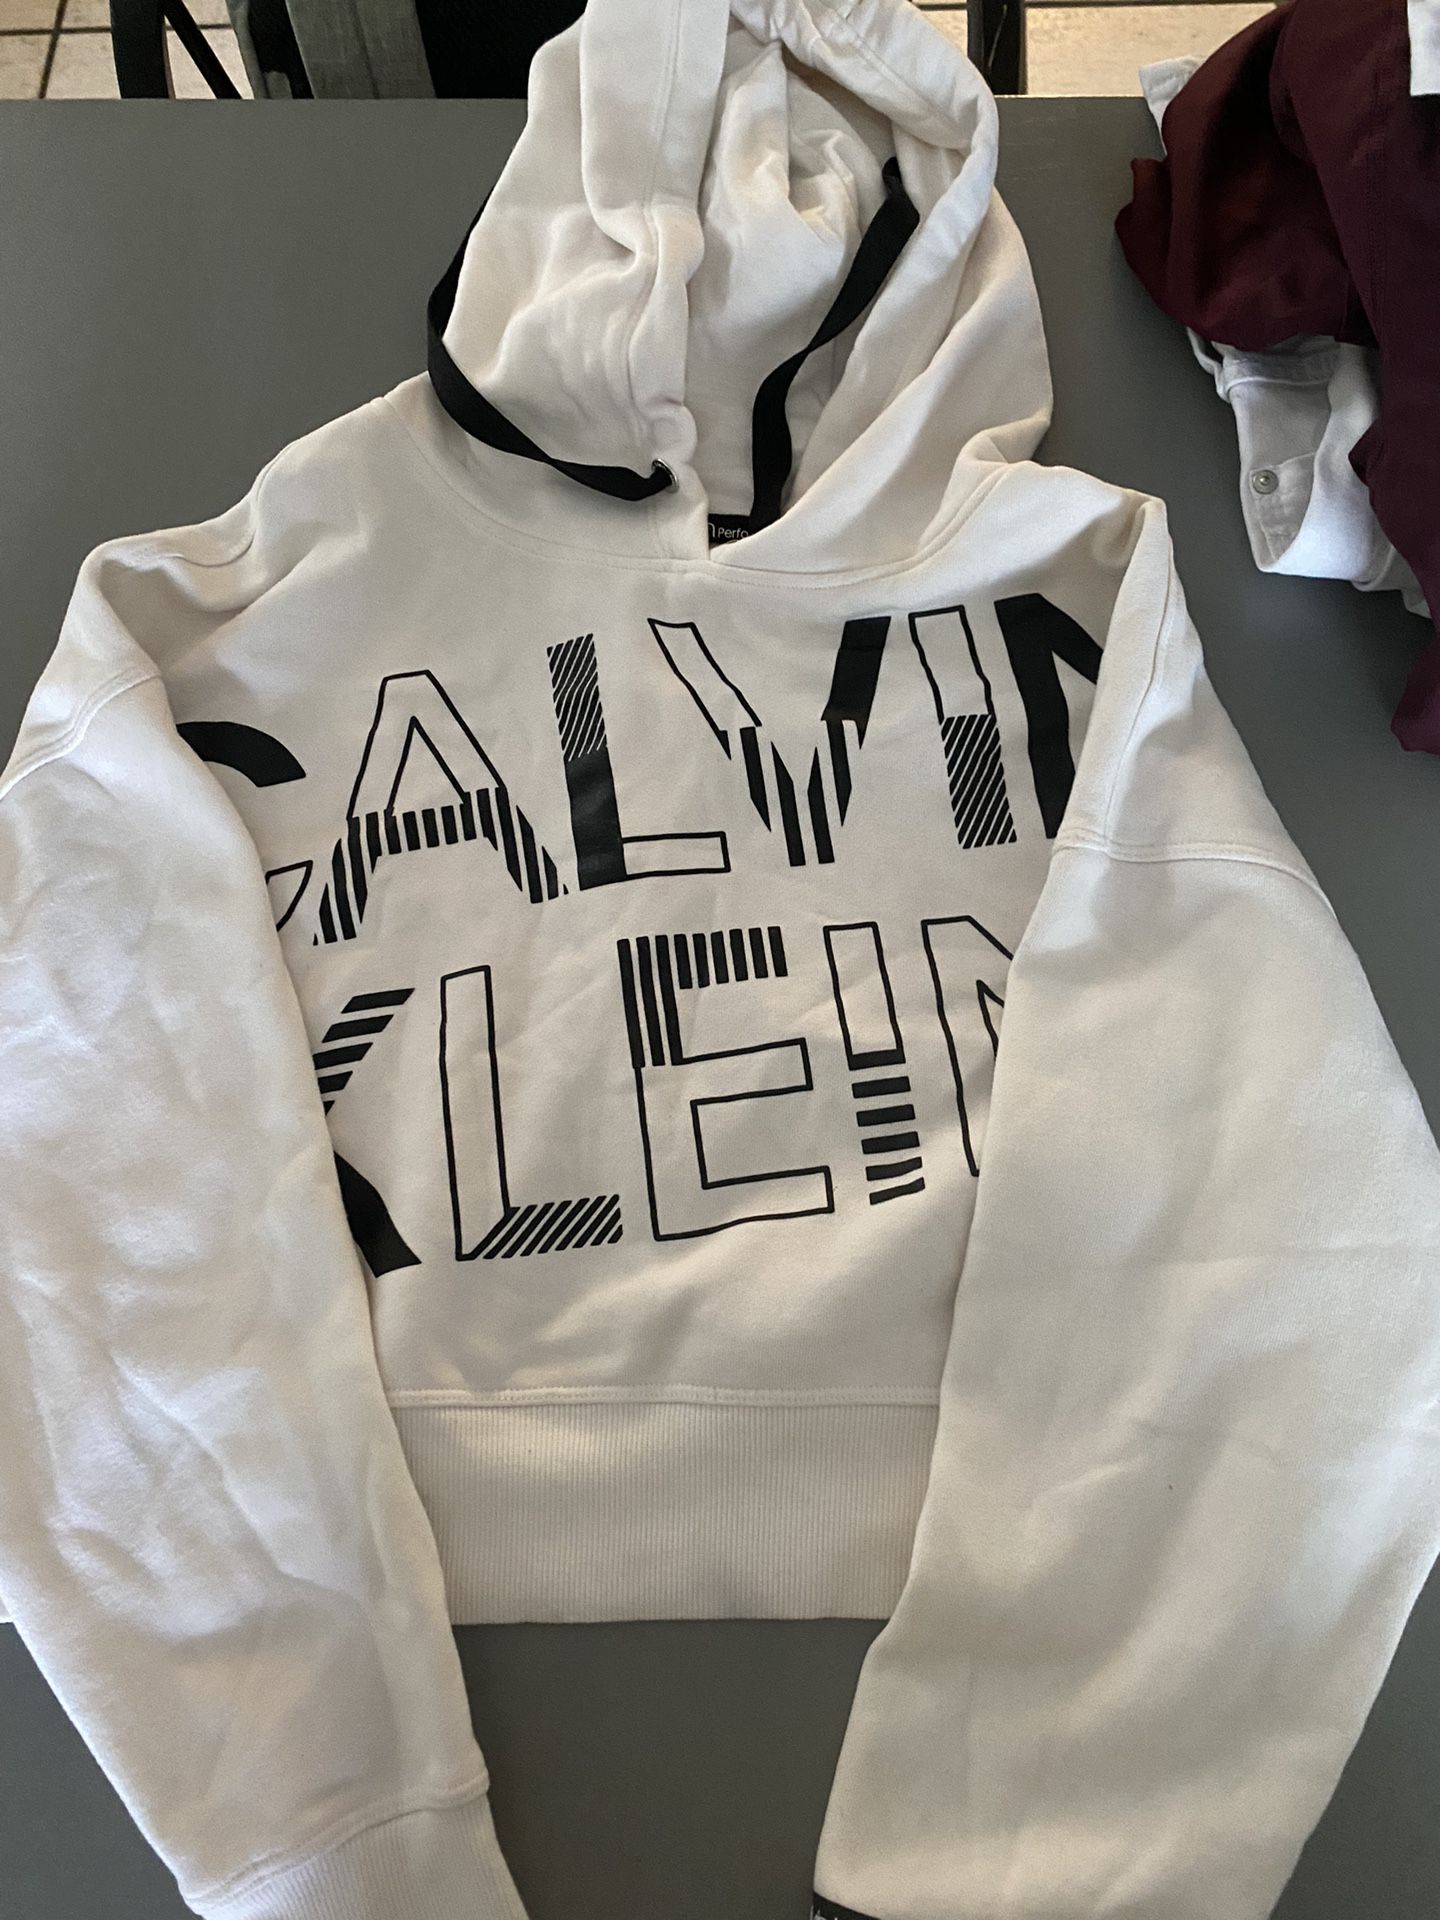 CK Cropped hoodie for Sale in Danville, PA - OfferUp